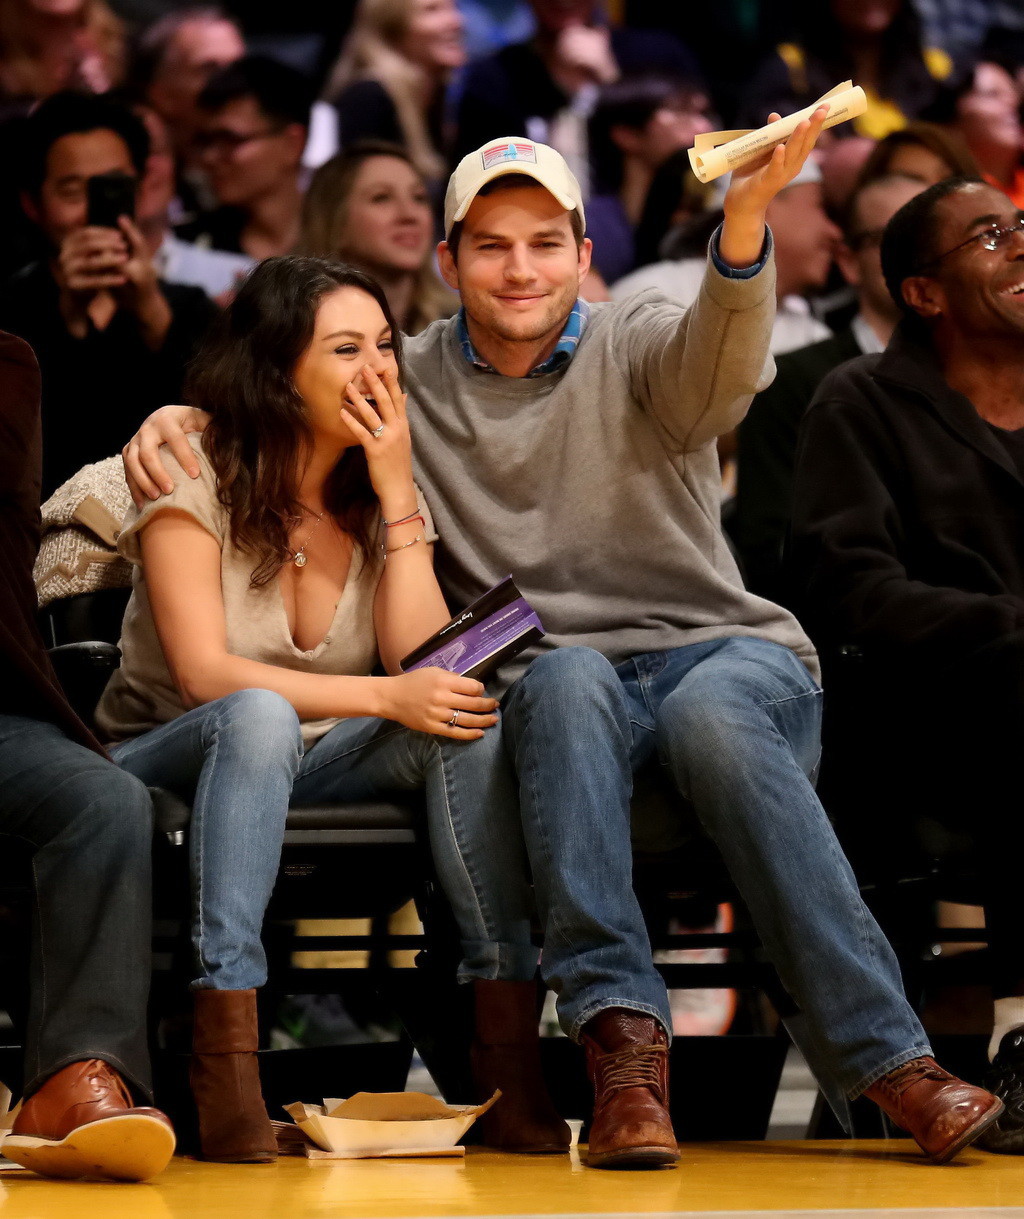 Mila Kunis busty showing huge cleavage at the LA Lakers game #75177789